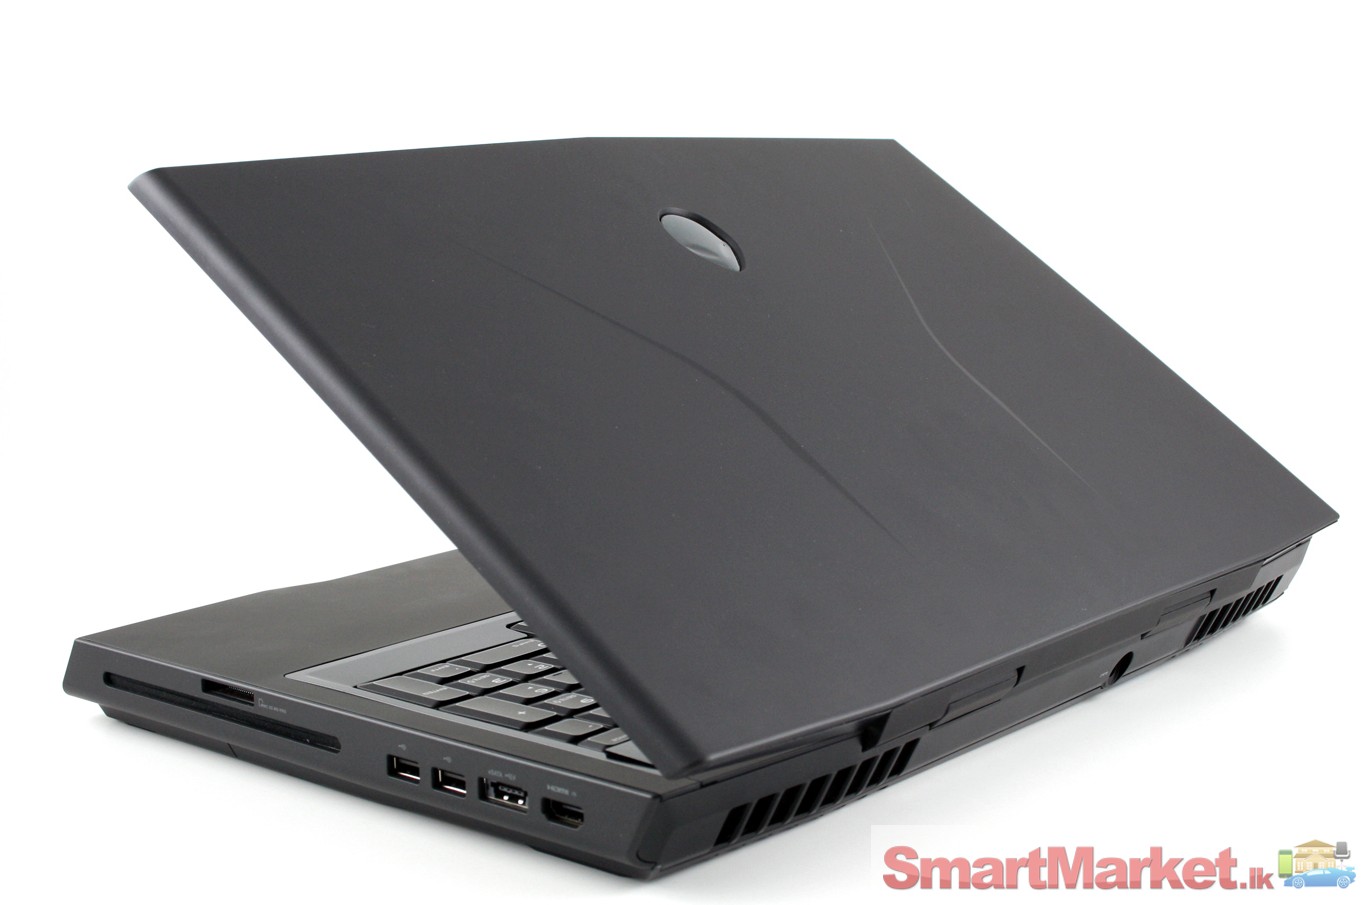 Alienware M17X R4 Stealth Black 3D SCREEN  3rd Gen i7 CPU, GTX 675 3D Video Card + 16GB DDR3 Ram 256GB SSD + 1000GB  The ultimate gaming experience on the go!